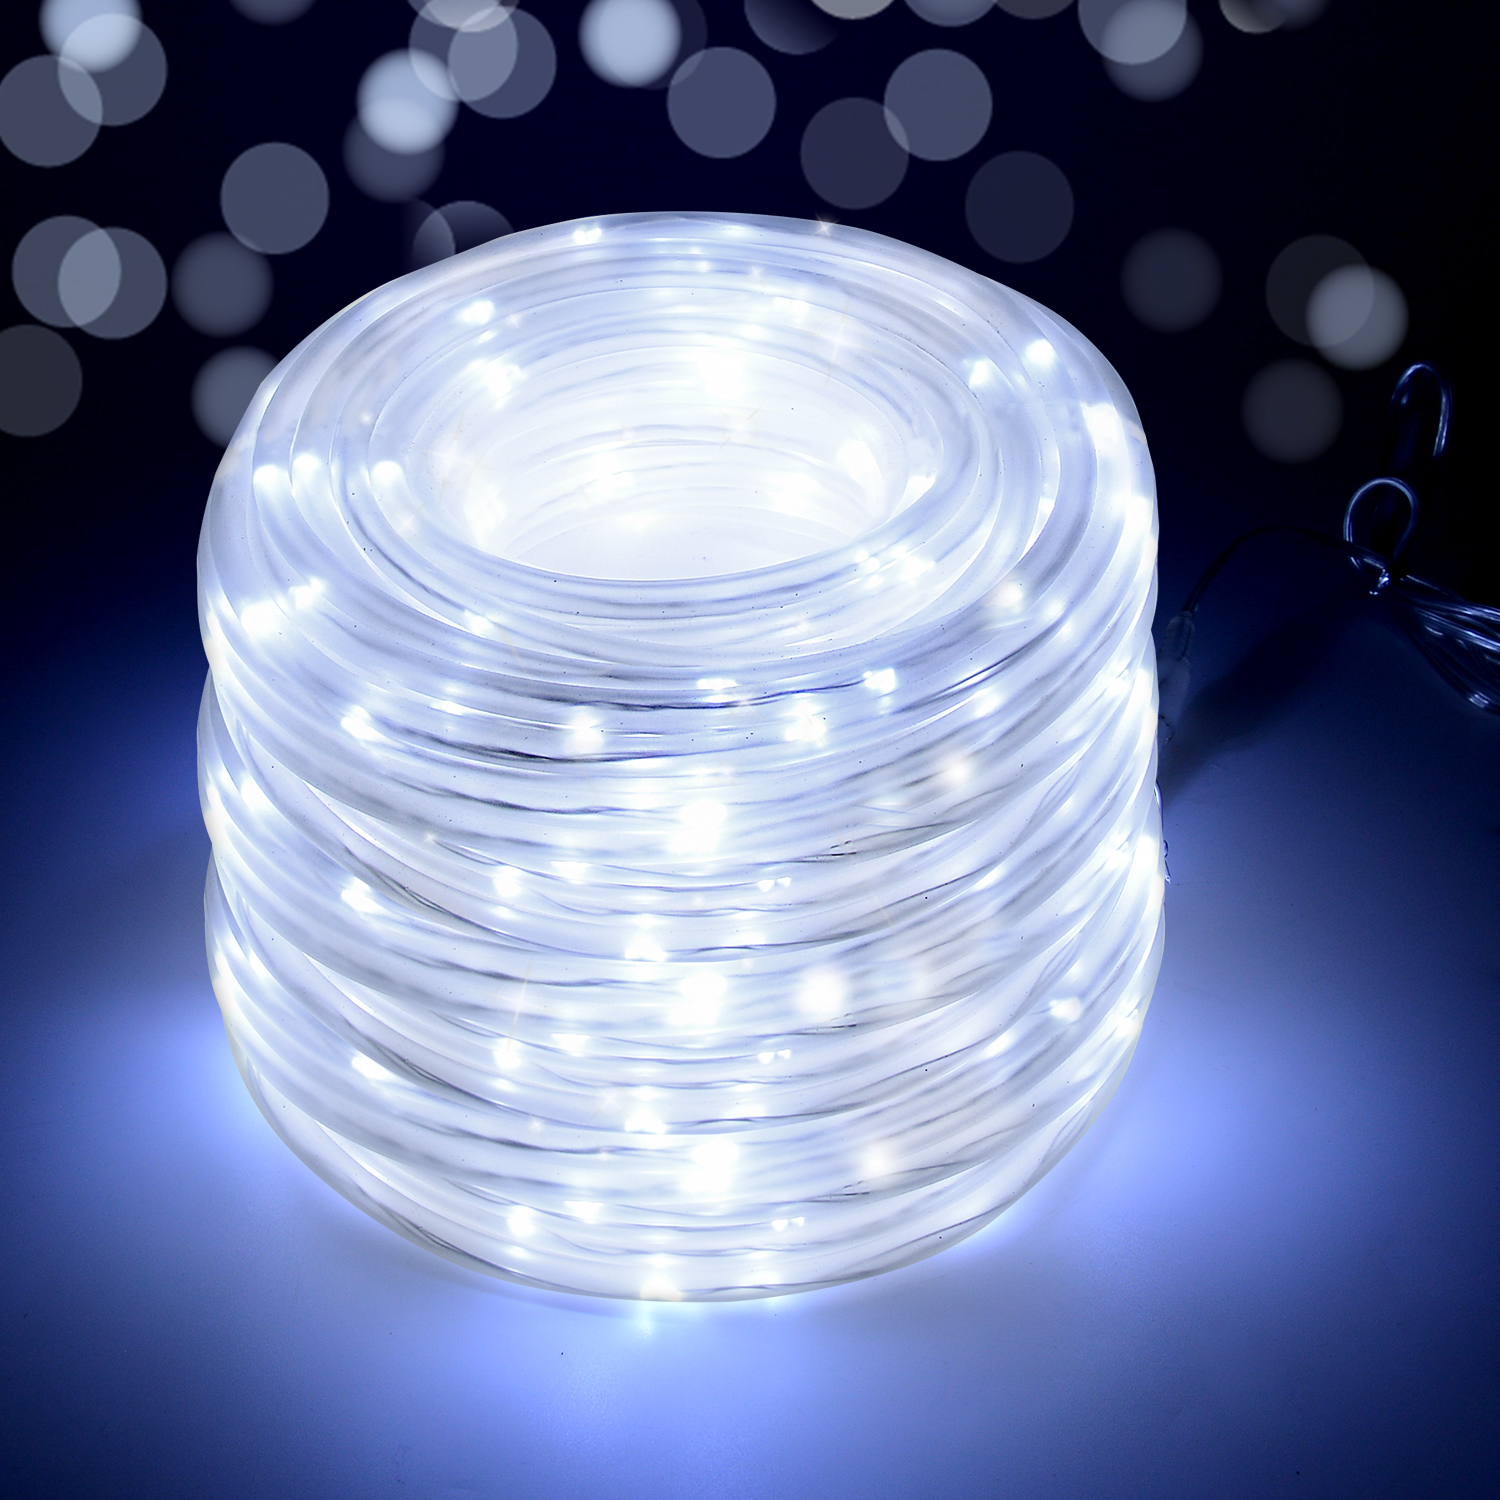 AGPtek 75.5FT 200LED Solar Powered Rope String Fairy Lights,Cool White 8 Modes Waterproof Outdoor - image 5 of 9